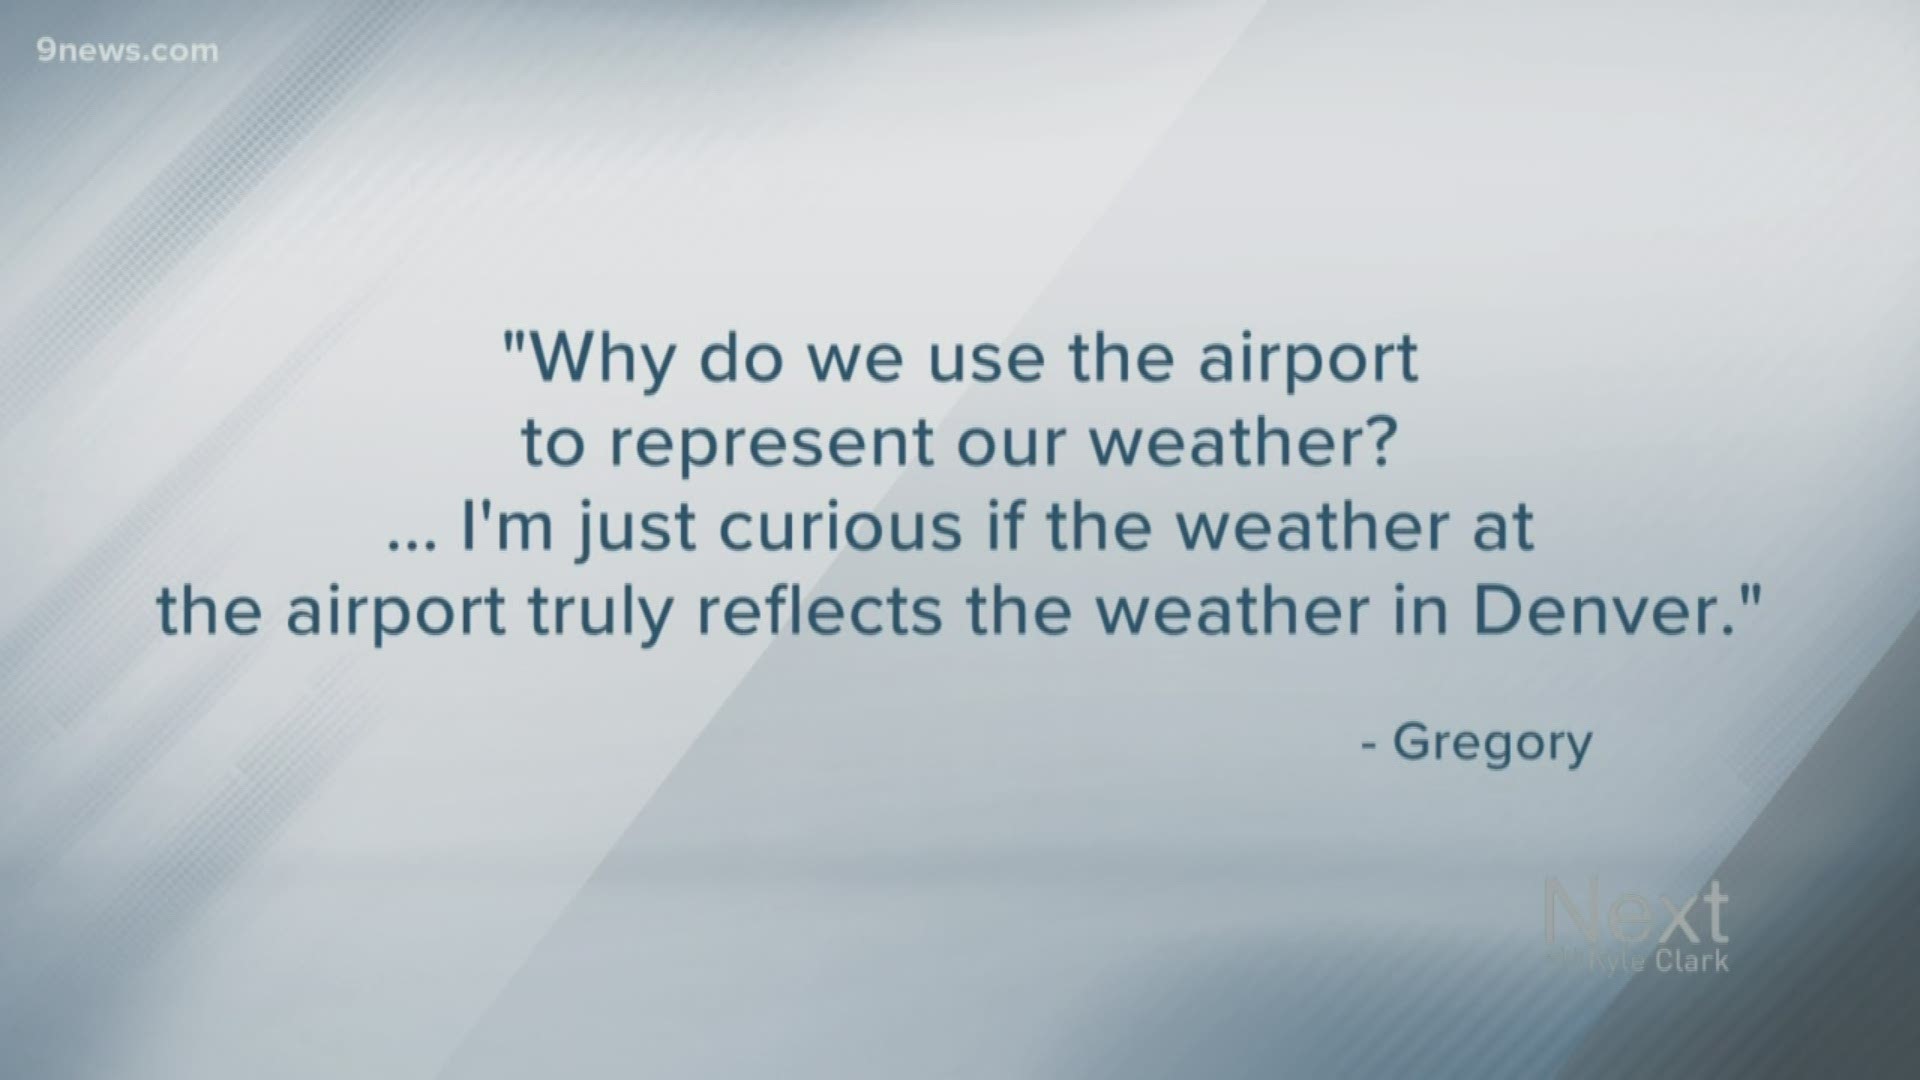 Our Next Question comes from Gregory. He'd like to know why we record our official weather measurements at the airport, and wonders if it really reflects Denver.